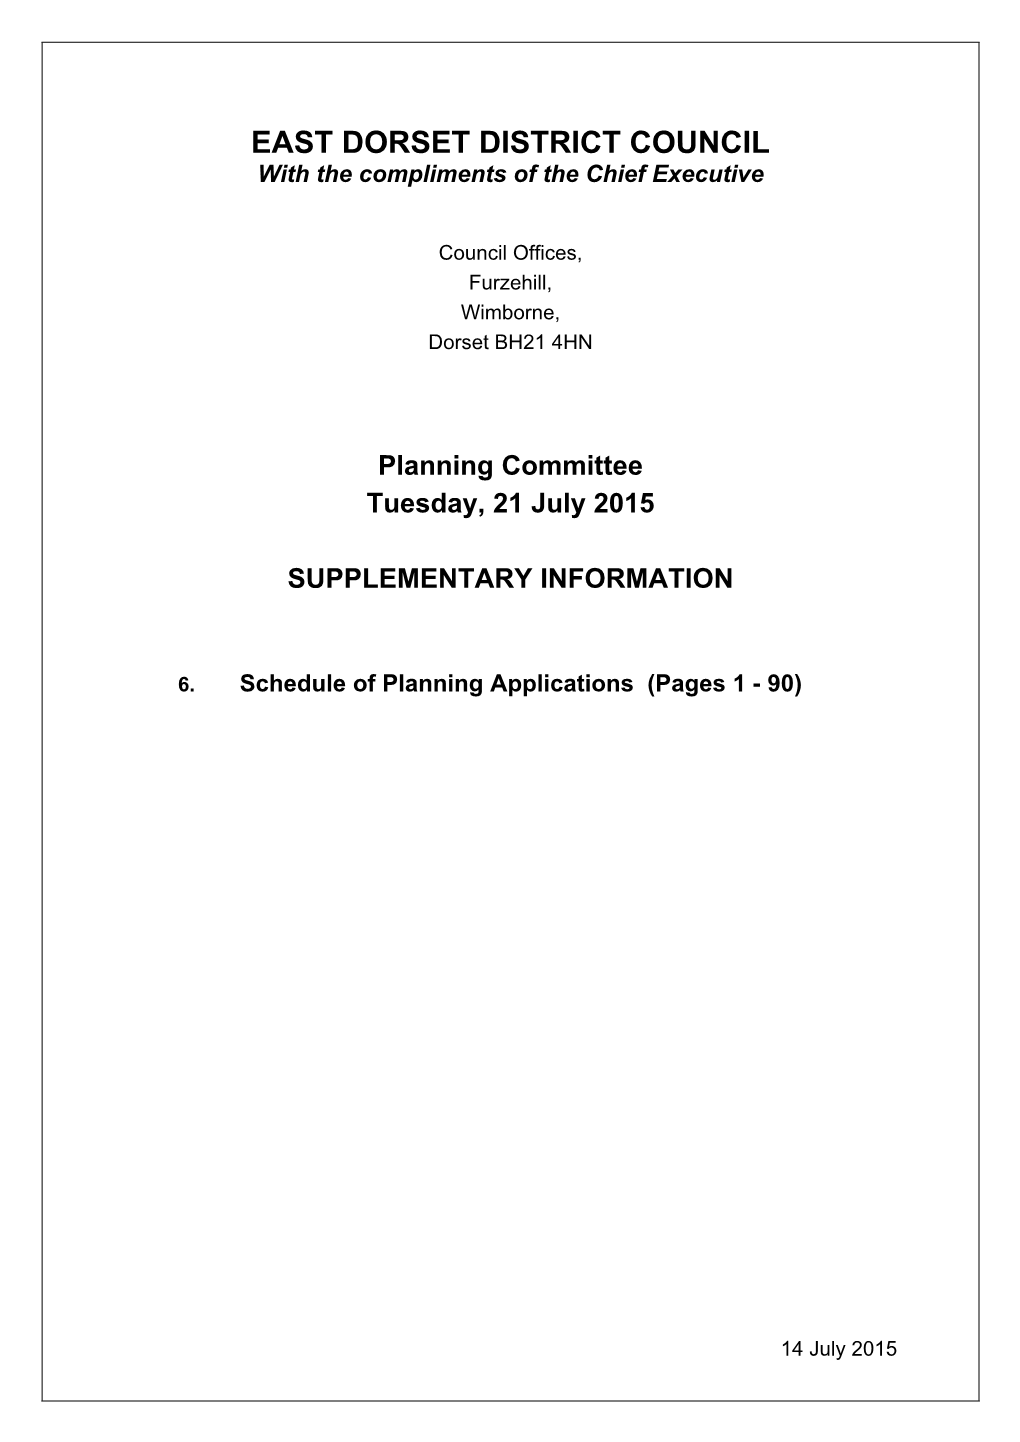 (Public Pack)Mapperton Farm Application Agenda Supplement for Planning Committee, 21/07/2015 09:30